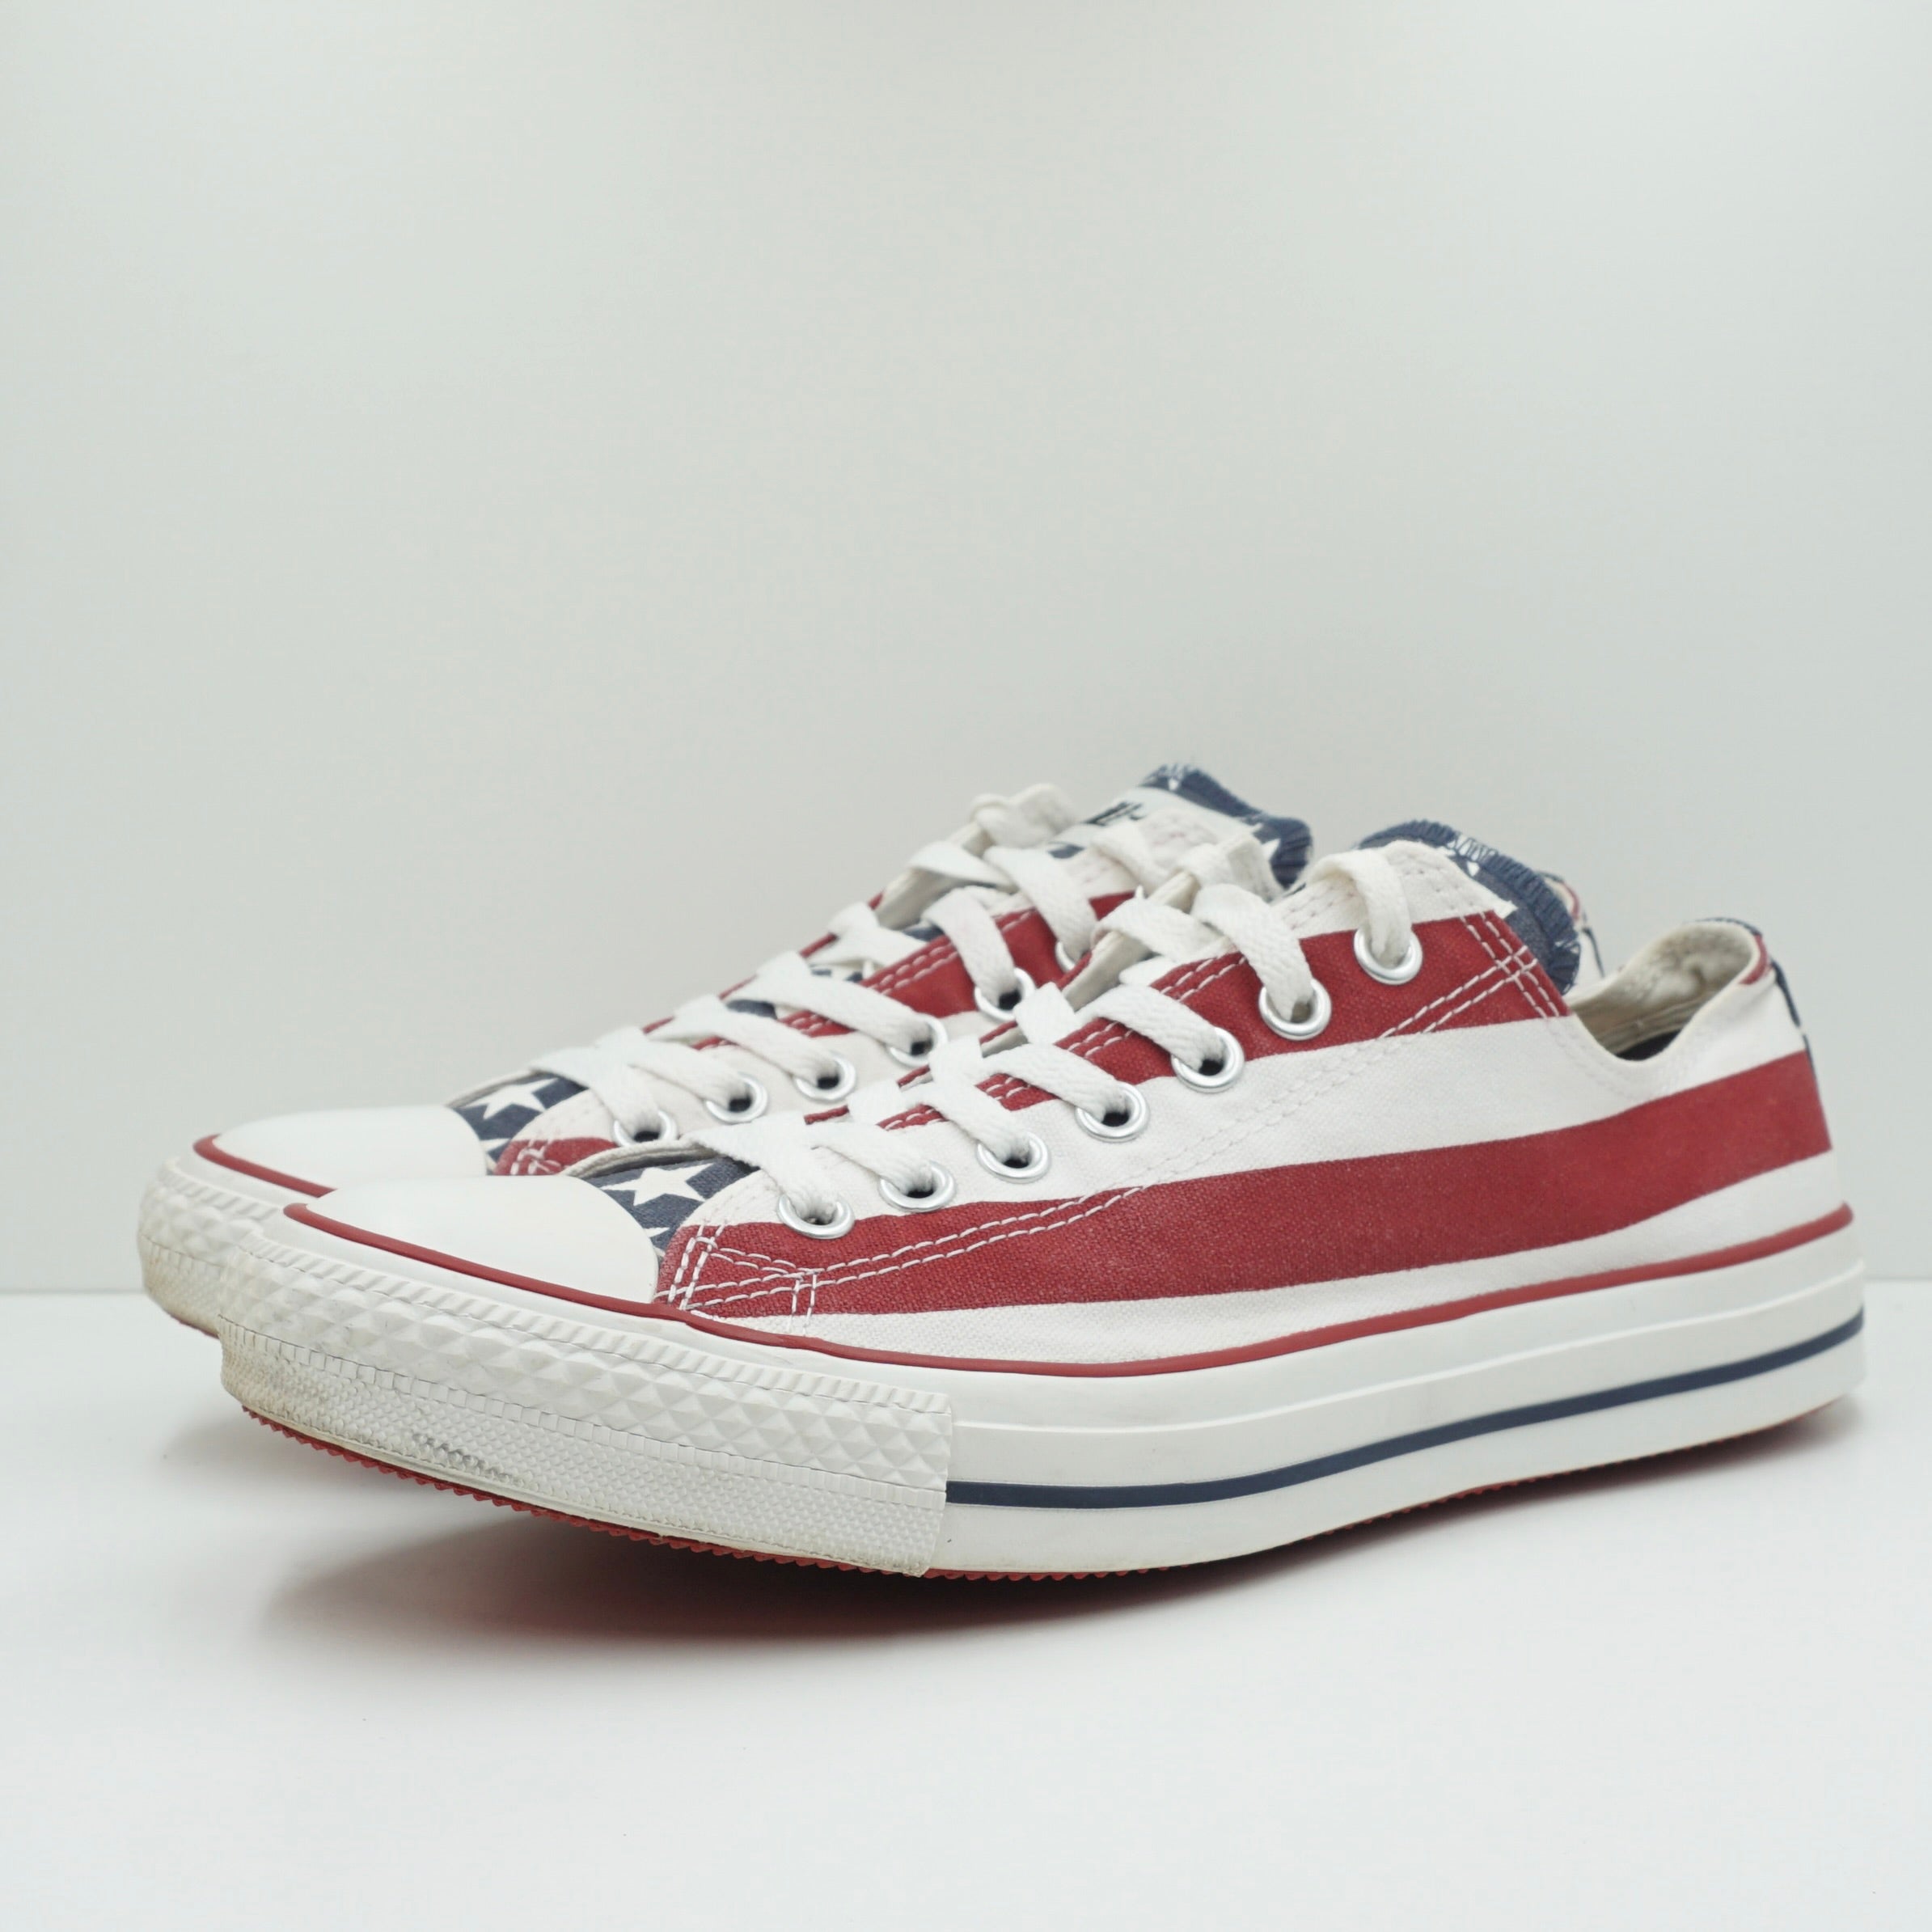 Converse Chuck Taylor All Star Low Stars and Stripes